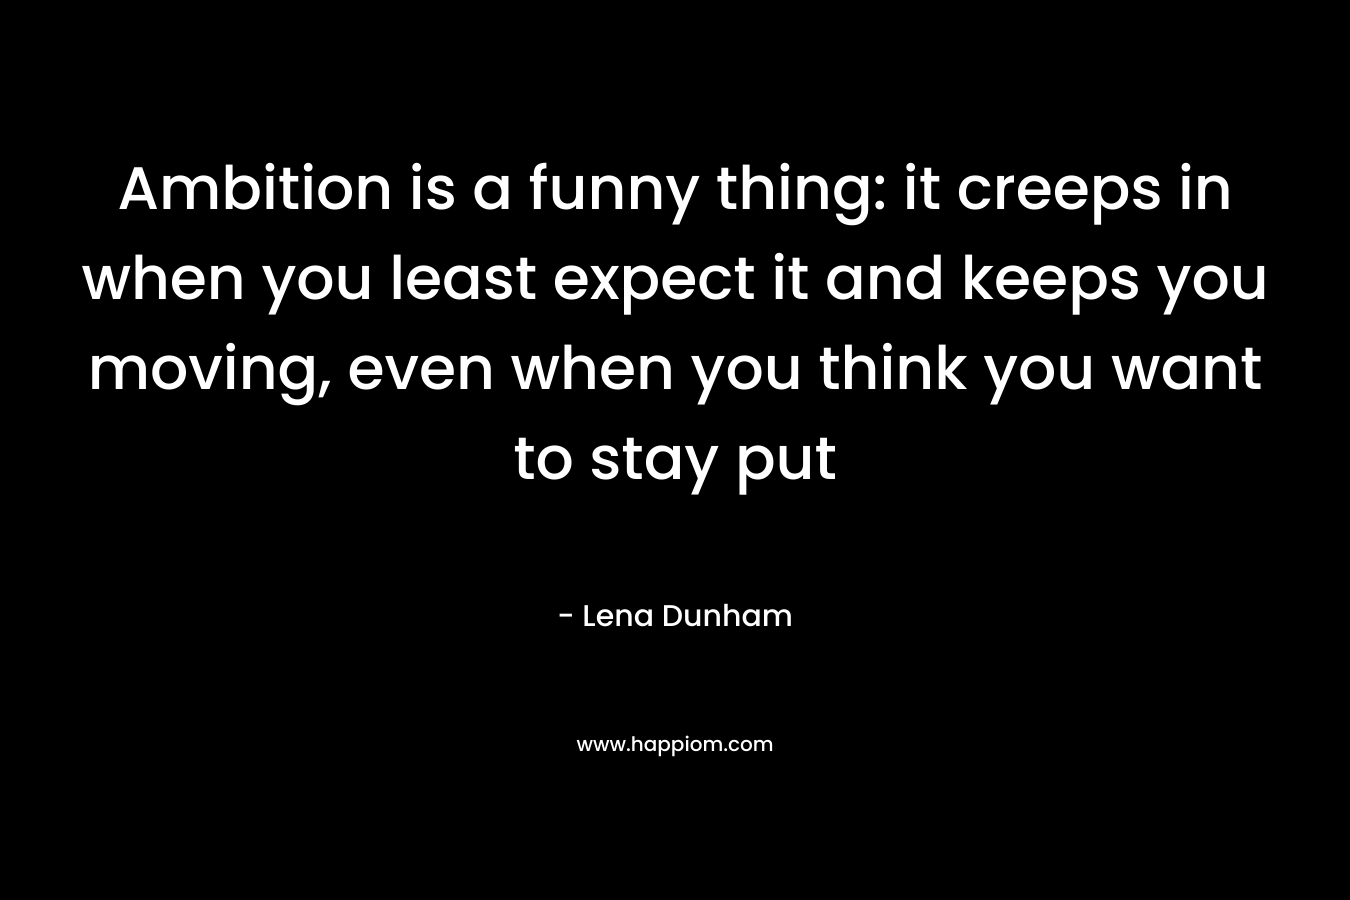 Ambition is a funny thing: it creeps in when you least expect it and keeps you moving, even when you think you want to stay put – Lena Dunham